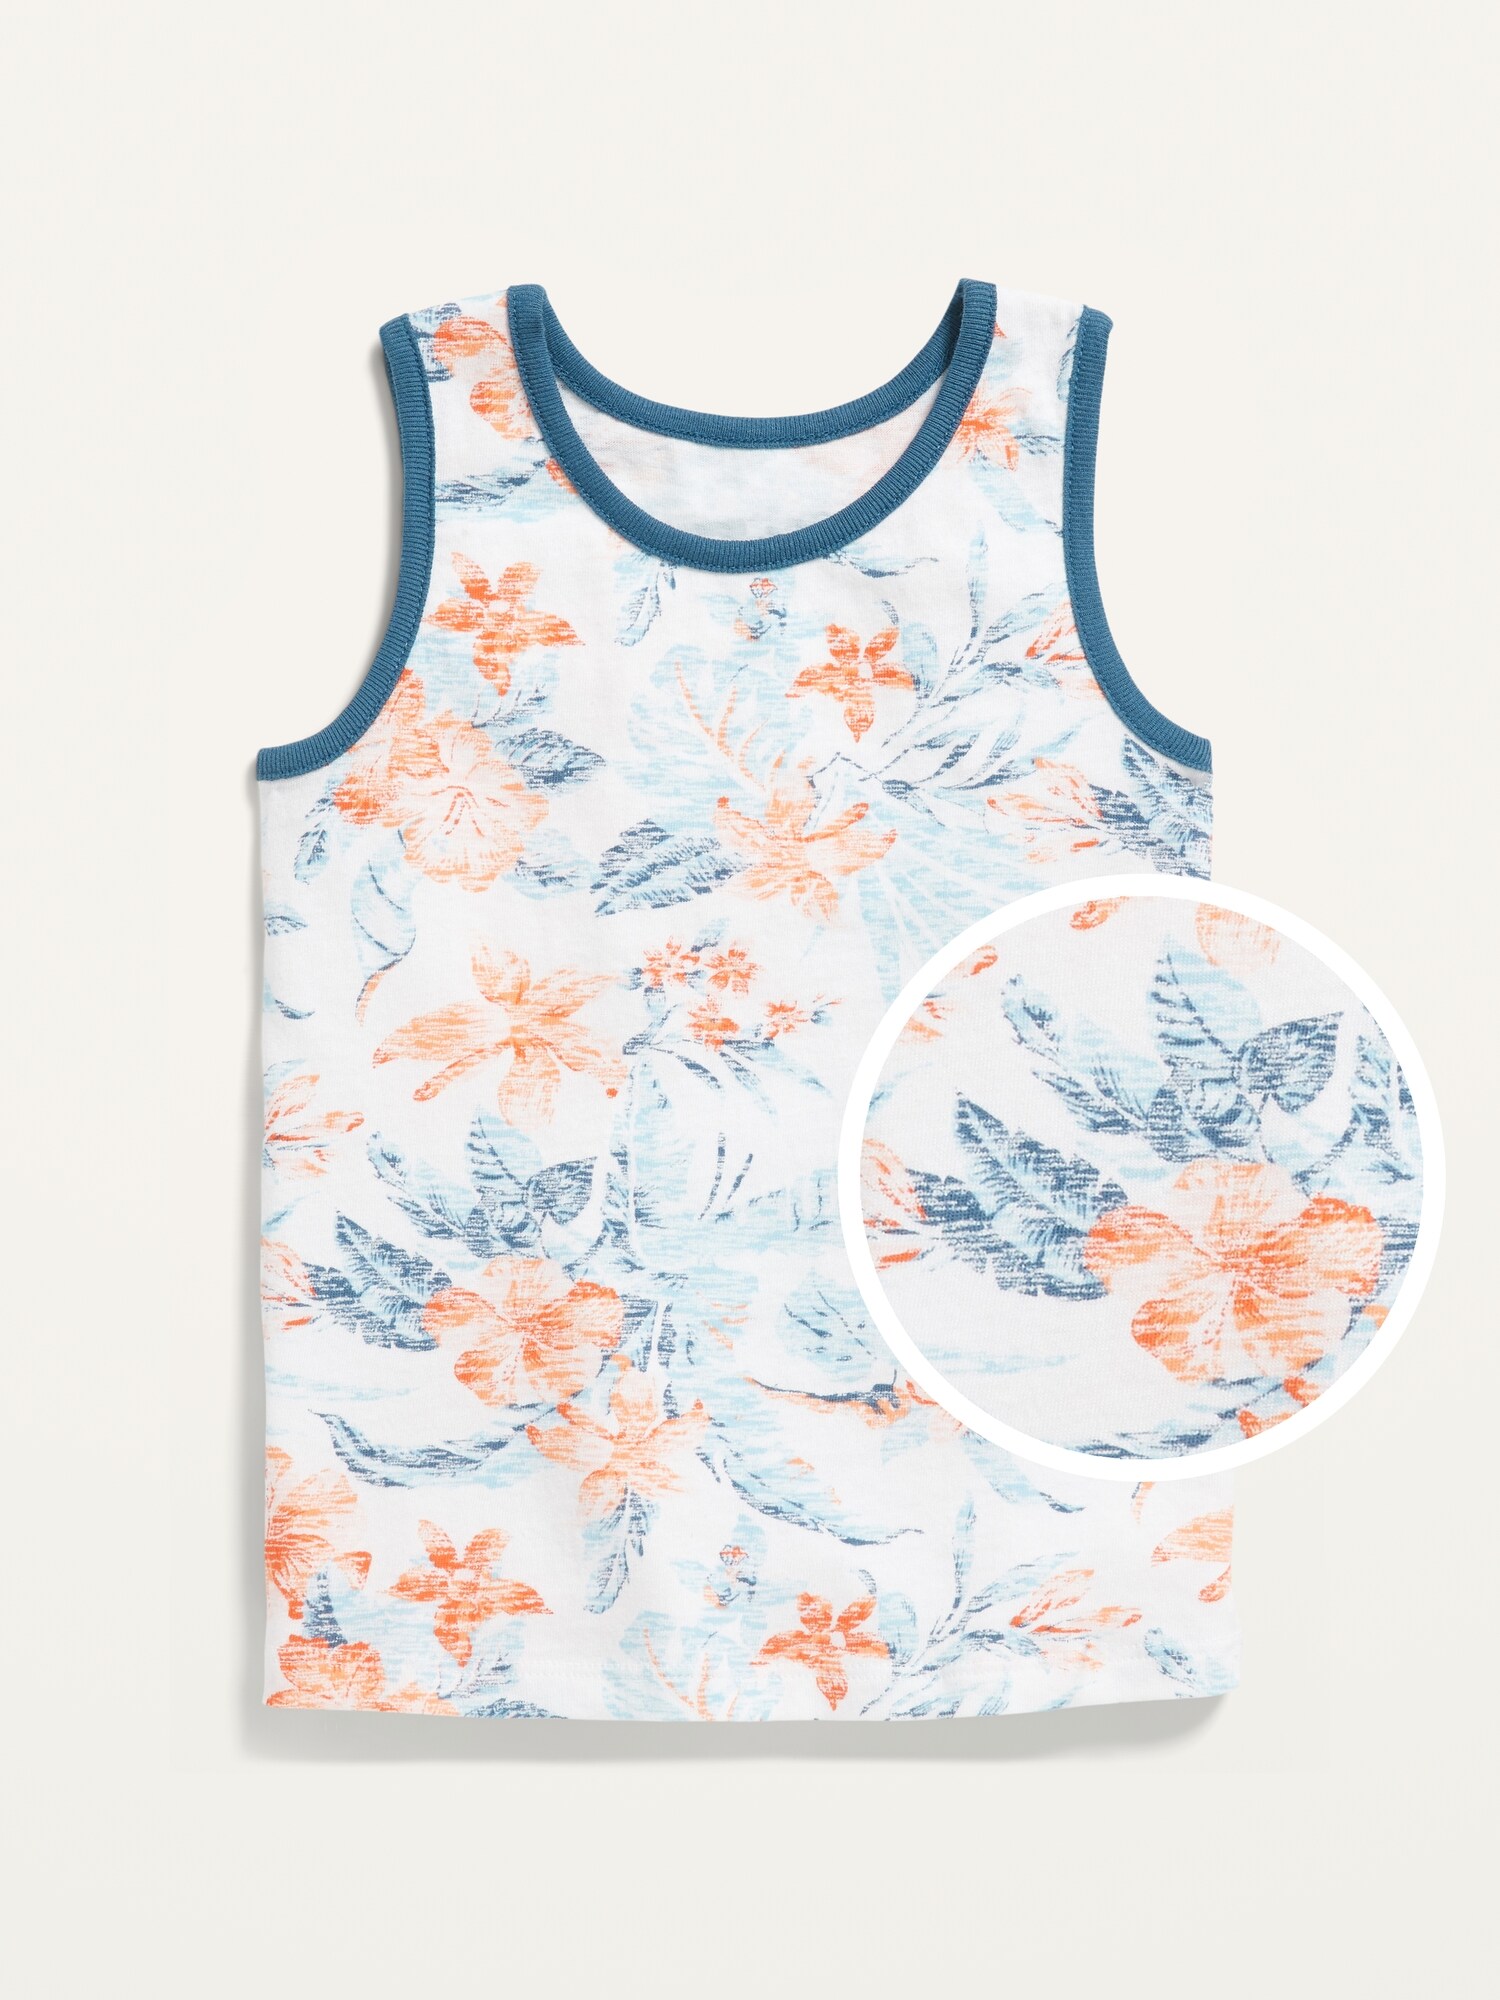 Unisex Floral-Print Tank Top for Toddler